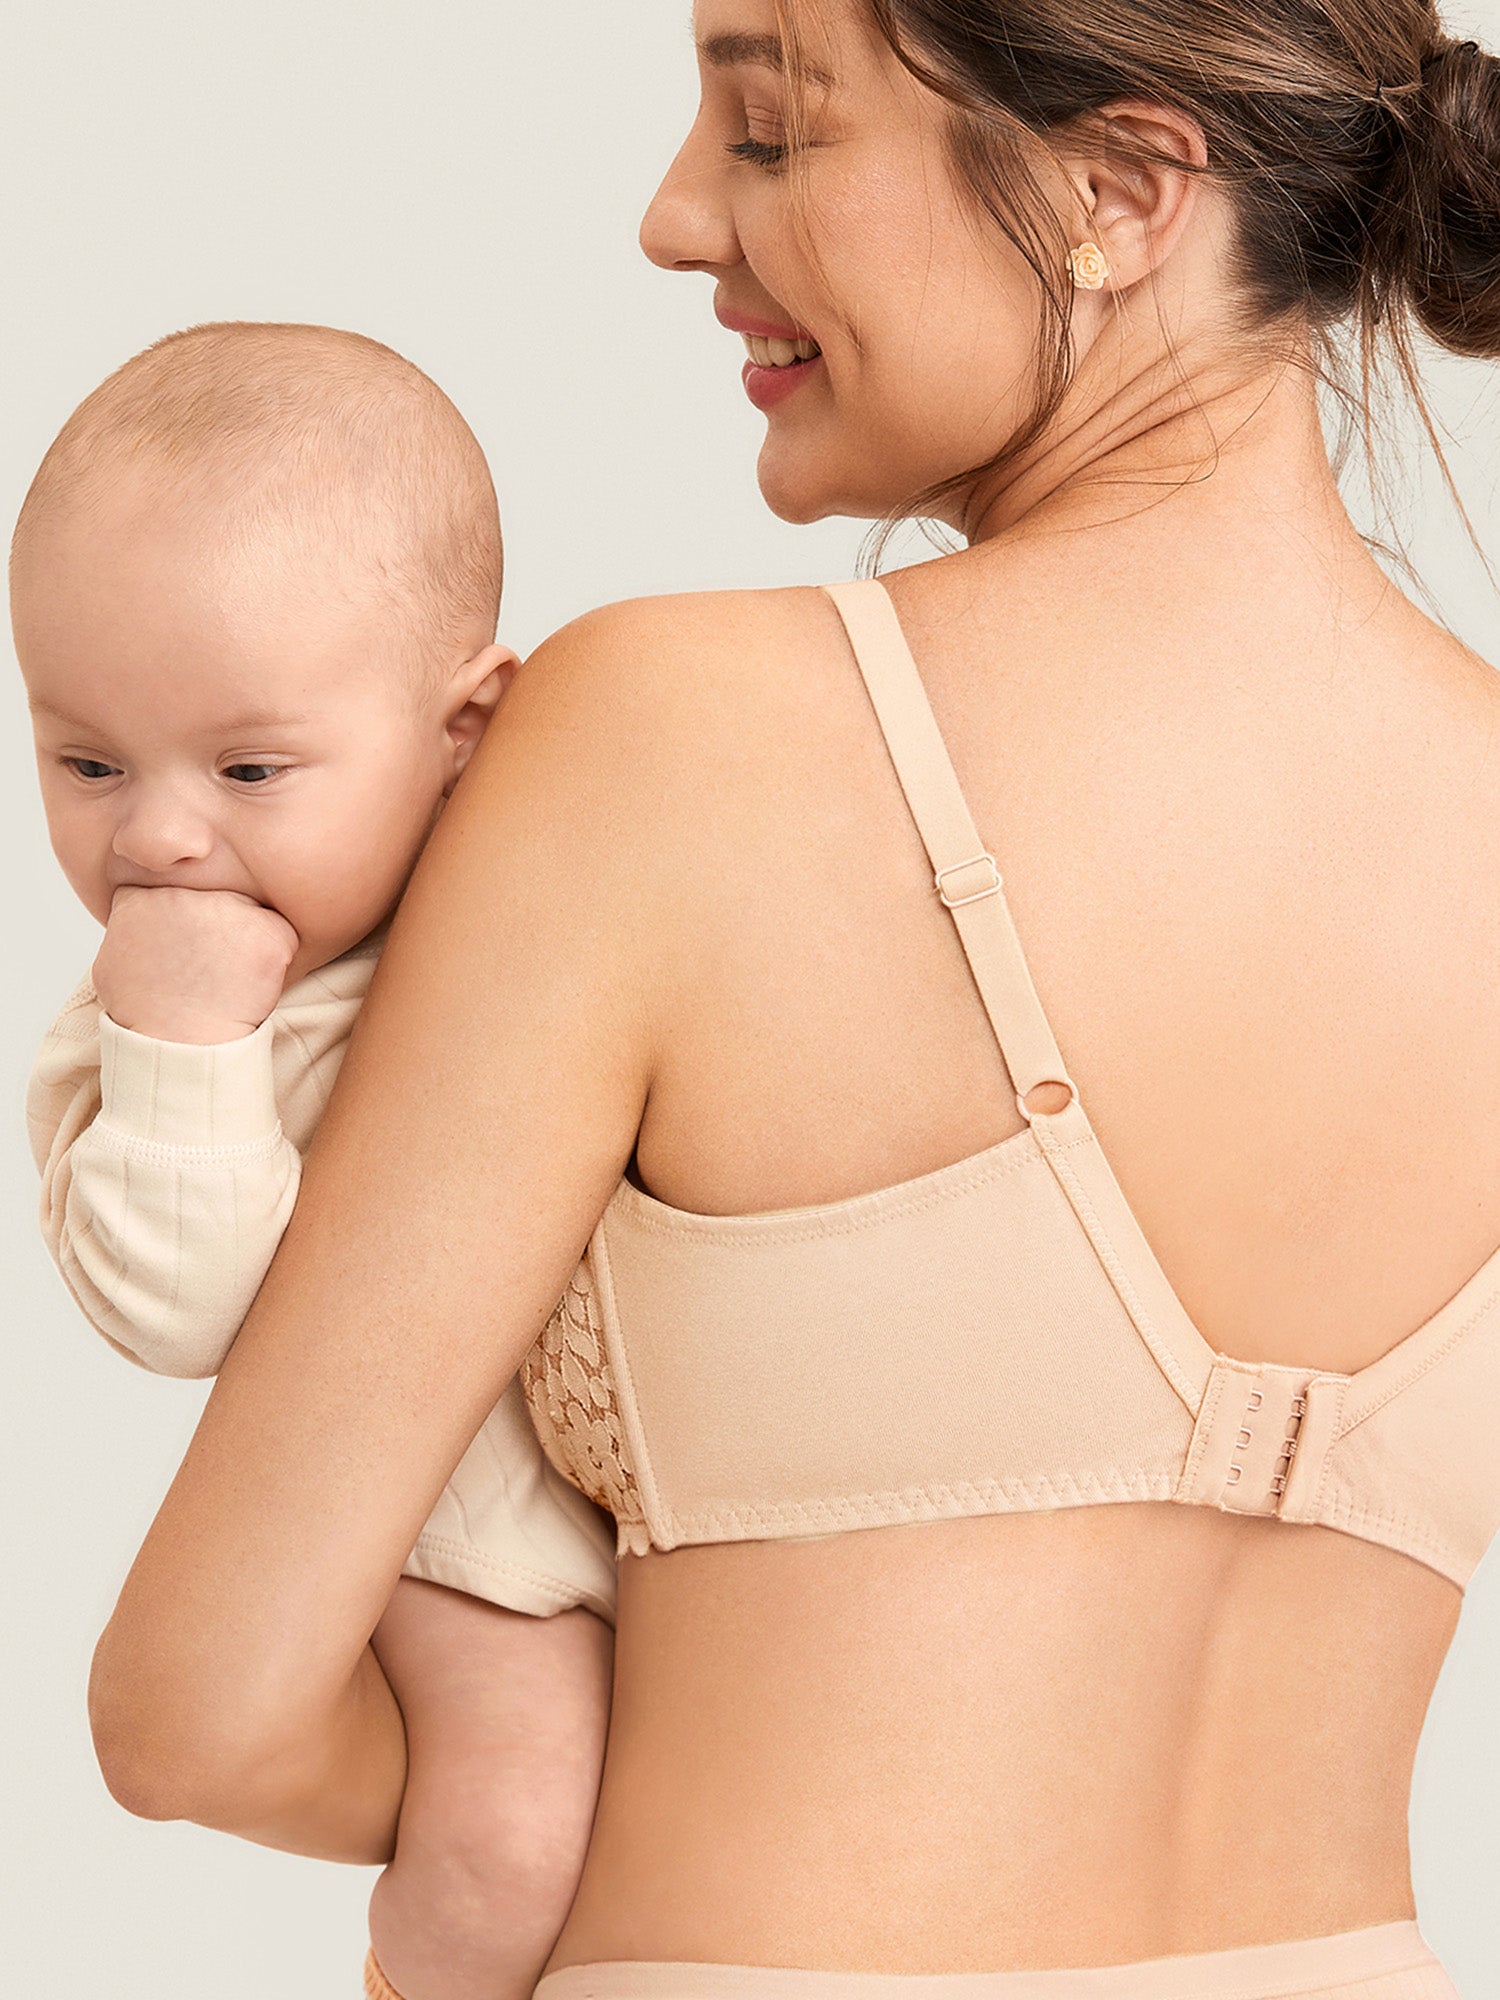 MOMANDA Lace Hands-free Pumping Bra Nursing Maternity For Pregnant Women  Underwire All In One Breastfeeding Maternal Support